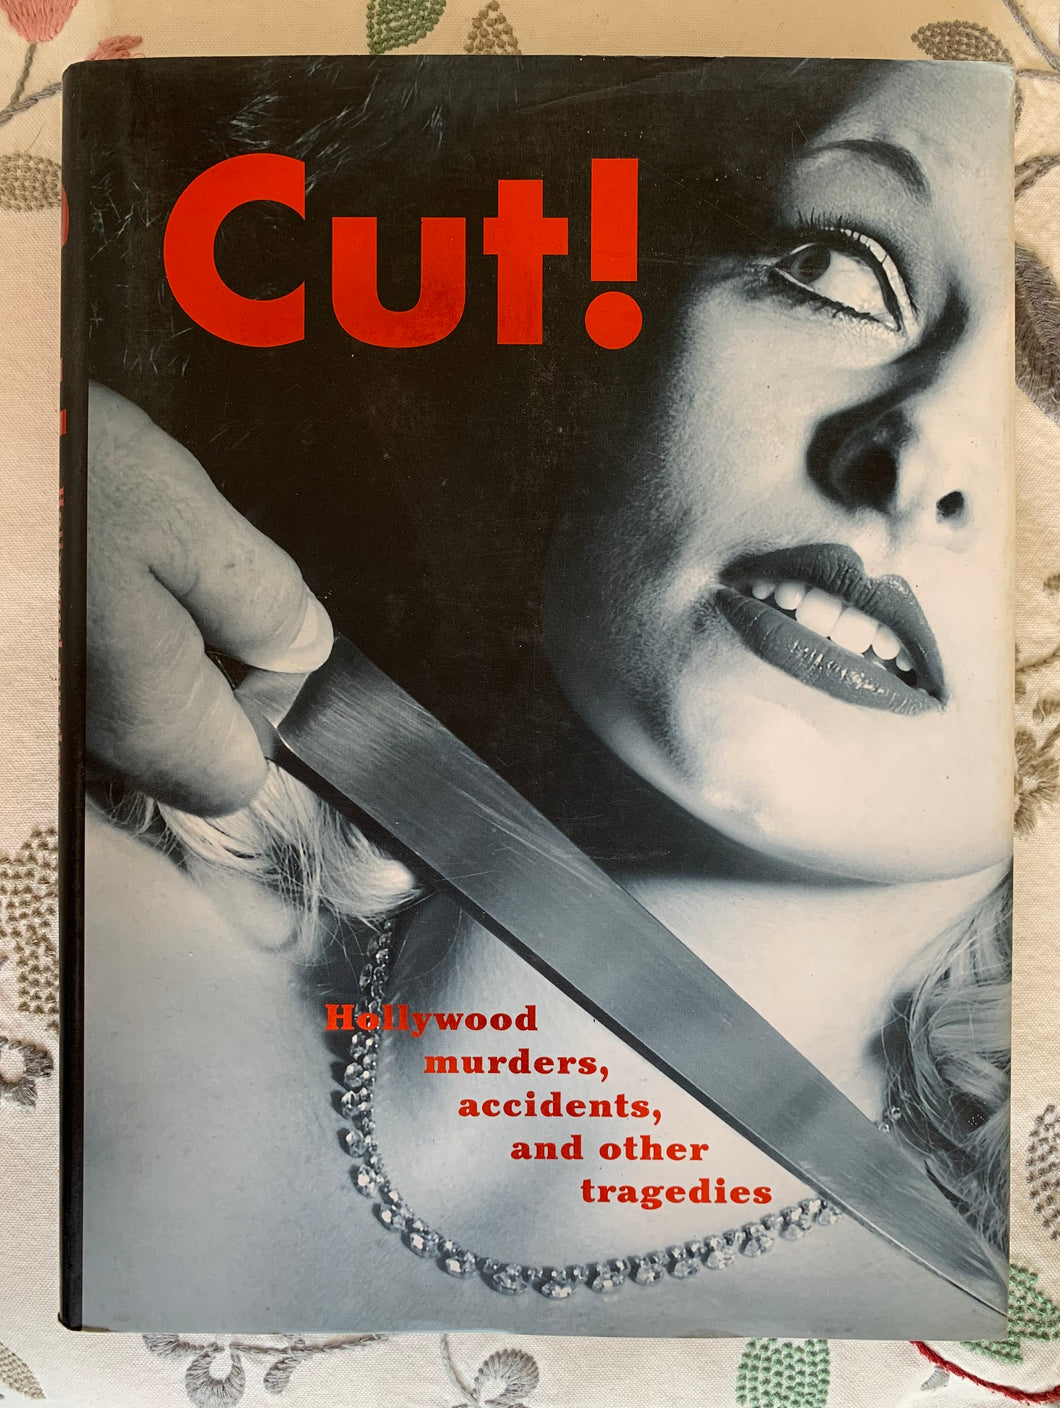 Cut!: Hollywood murders, accidents, and other tragedies